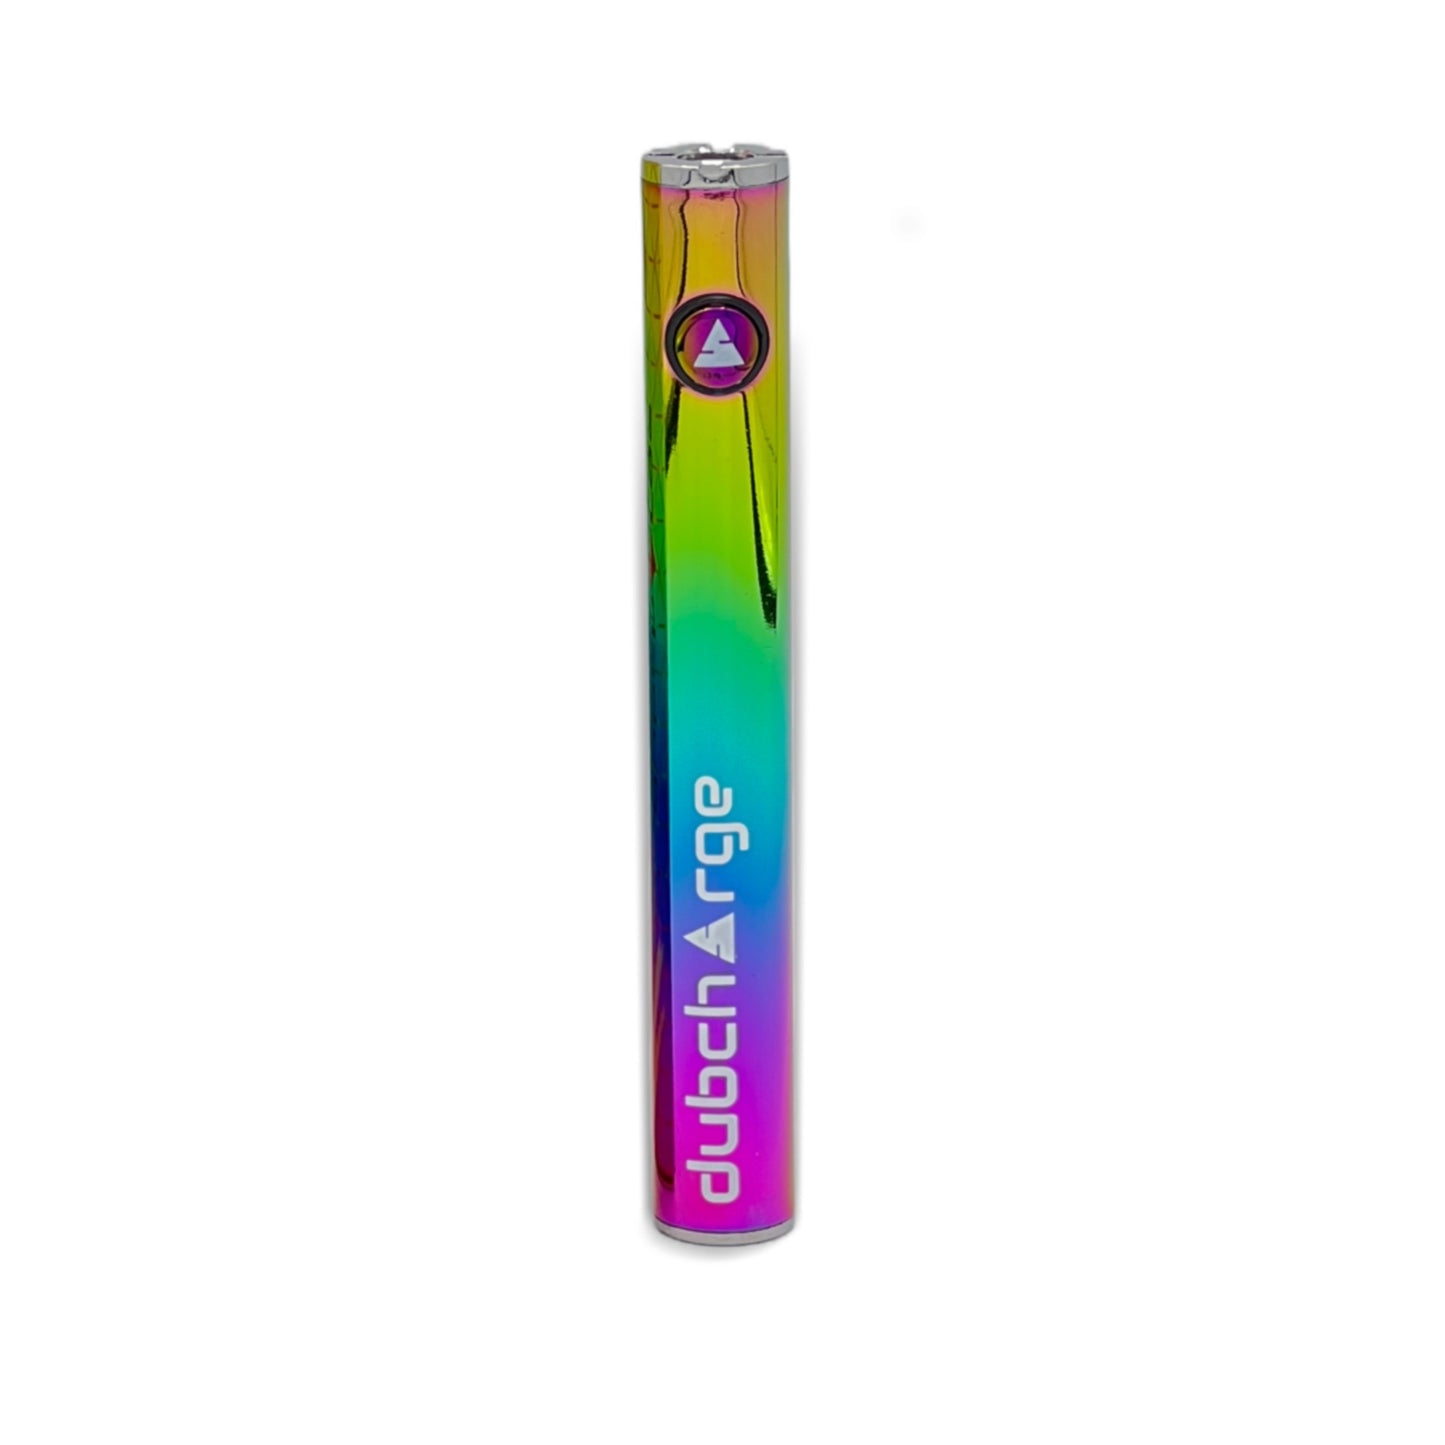 510 Thread Vaporizer Battery - RAINBOW | 900 mAh - High-Quality Battery for Vaping Devices